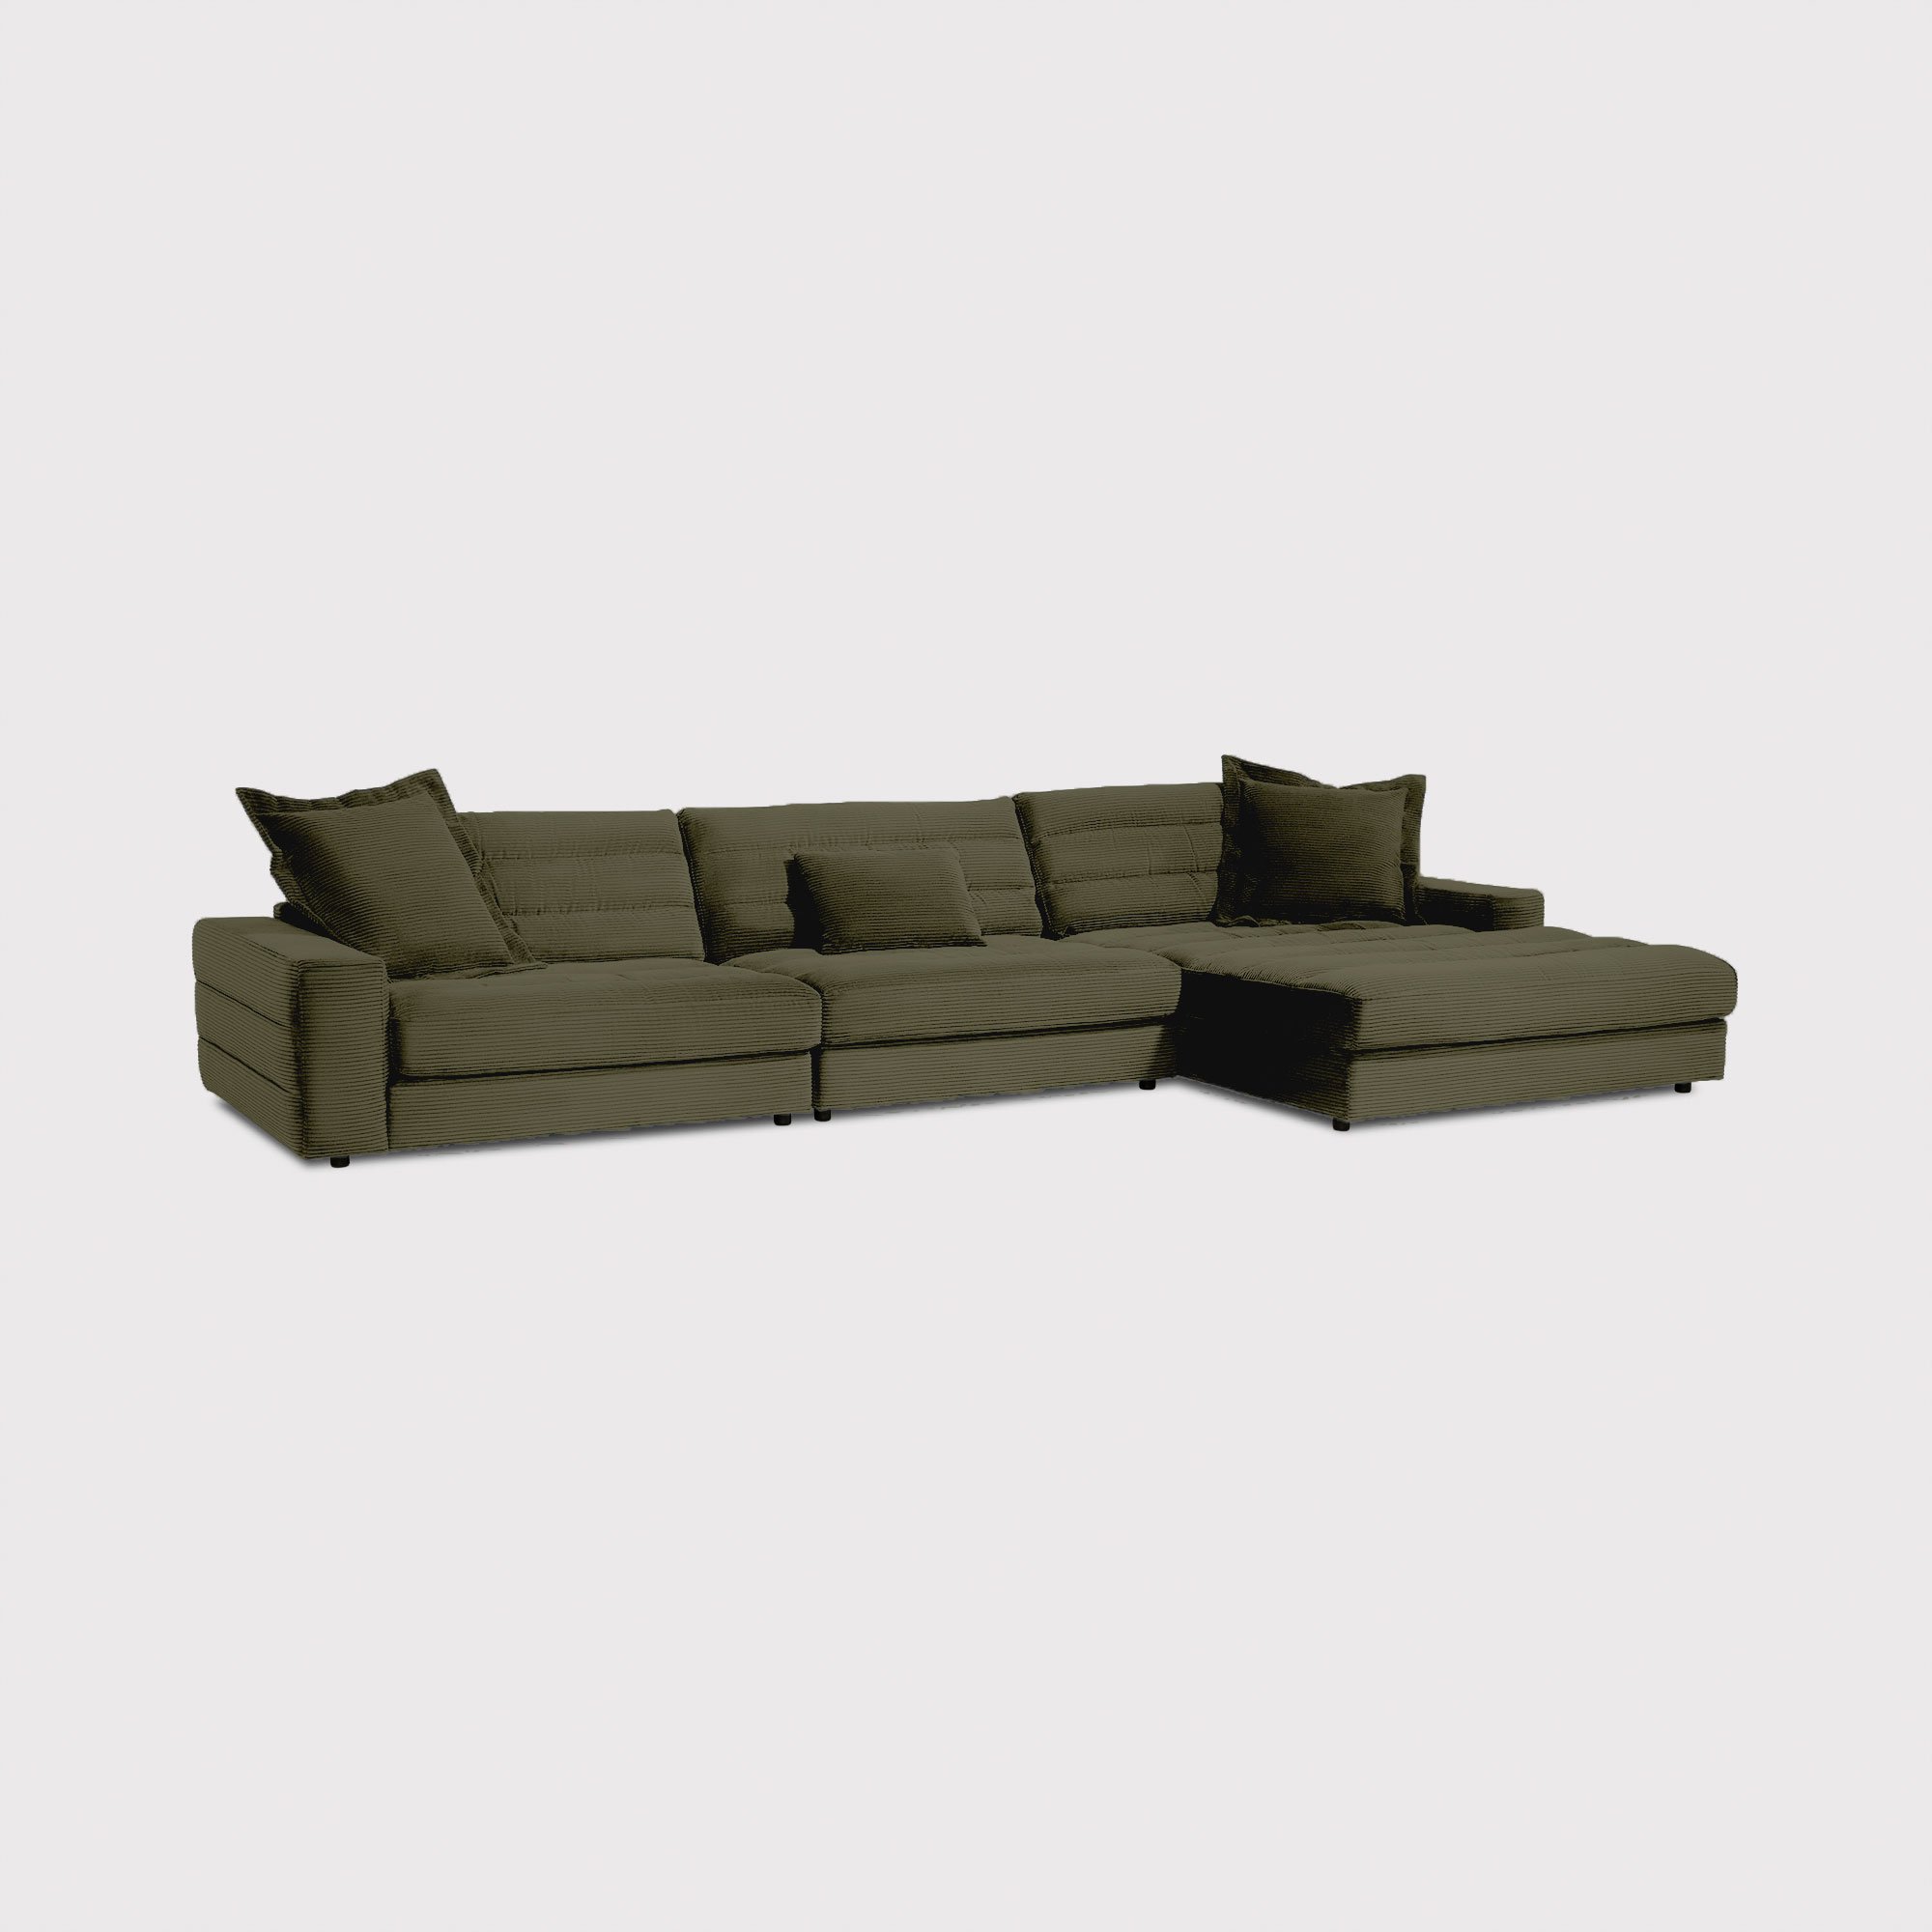 Twain Large Chaise Sofa Right, Green Fabric | Barker & Stonehouse